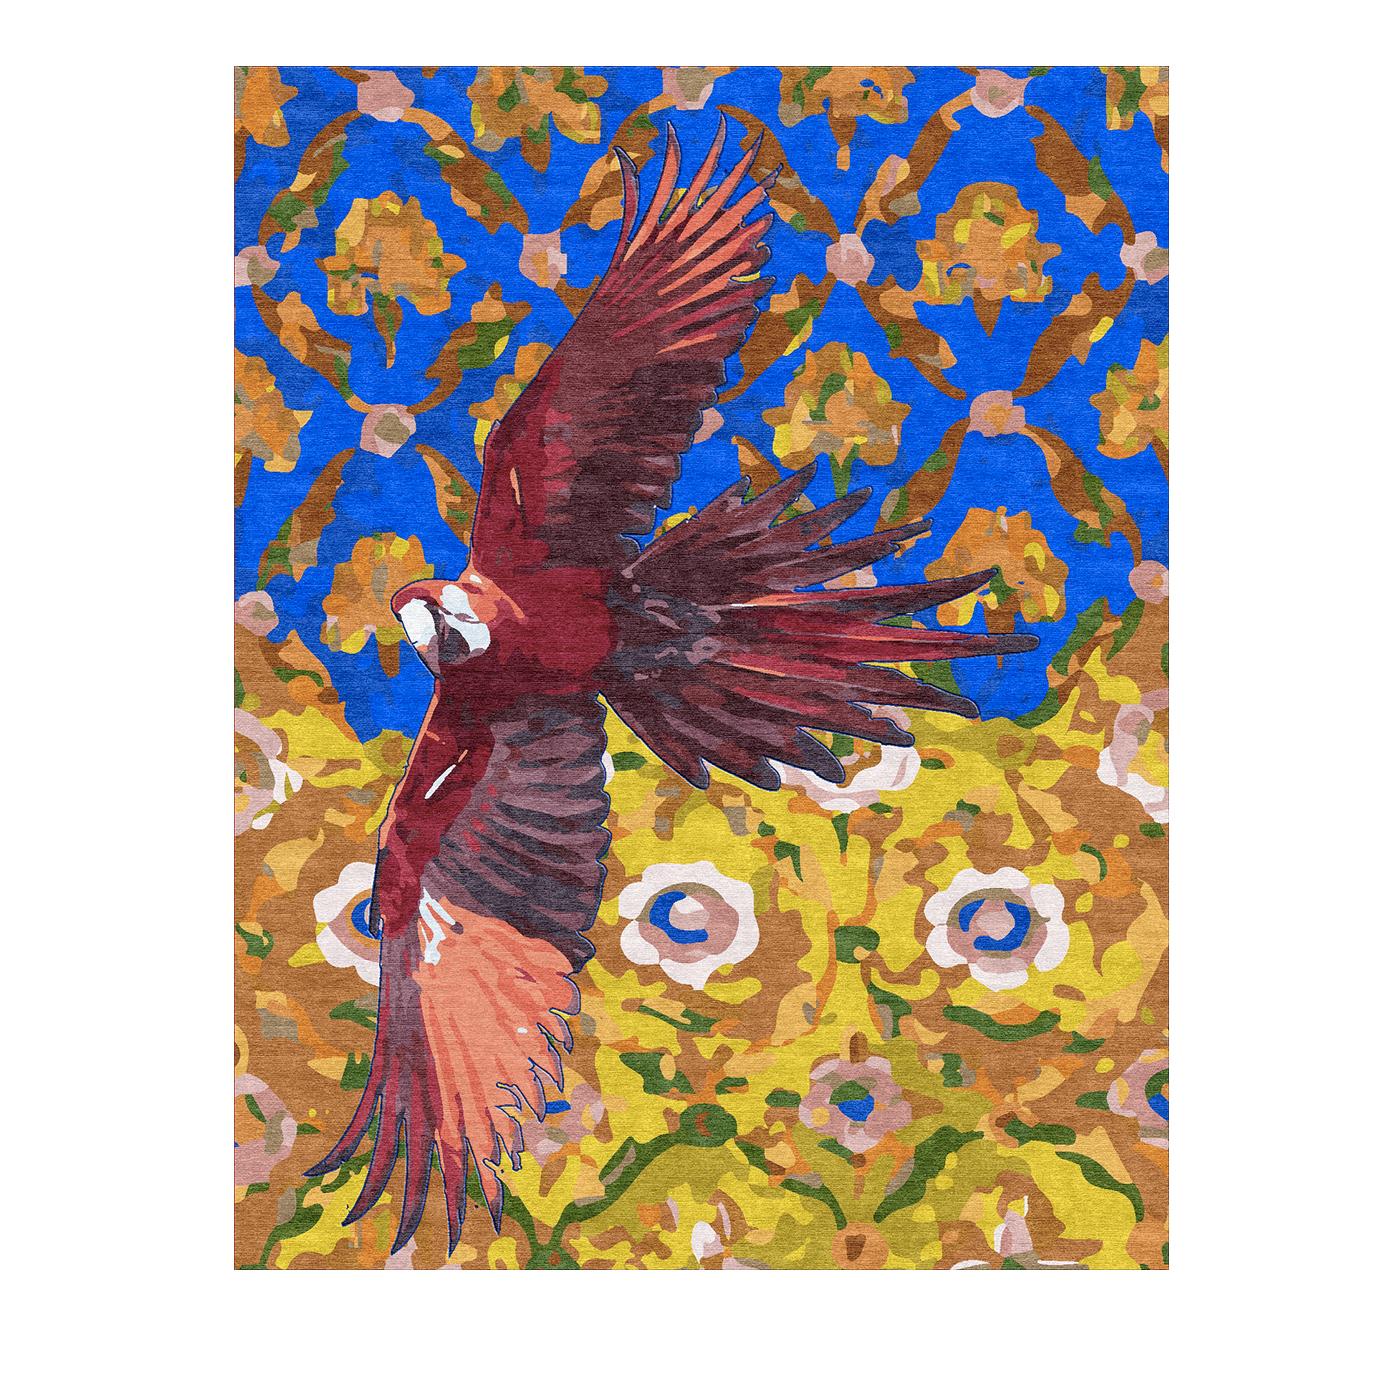 Reminiscent of Matisse's fauvist masterpieces, this piece features a colorful phoenix gliding through a vibrant, fanciful landscape. Its elongated body and bold, red wings elegantly contrast with the cerulean-blue sky and the mustard-yellow